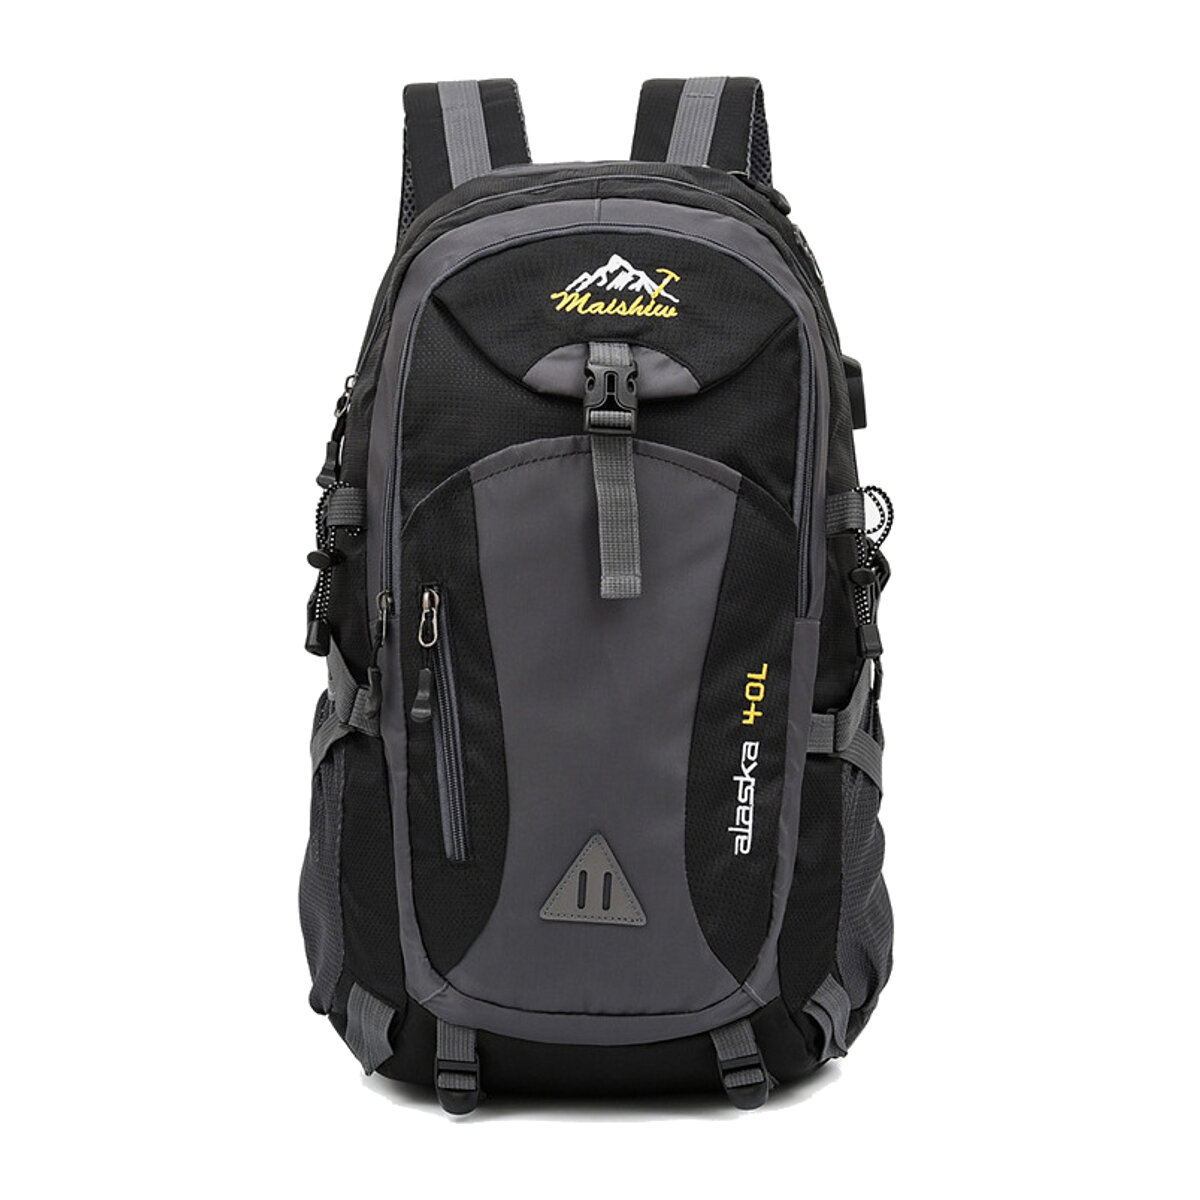 Backpack Outdoor Mountaineering Bag Laptop Bag Travel Shoulders Storage Bag with USB for 16inch Notebook